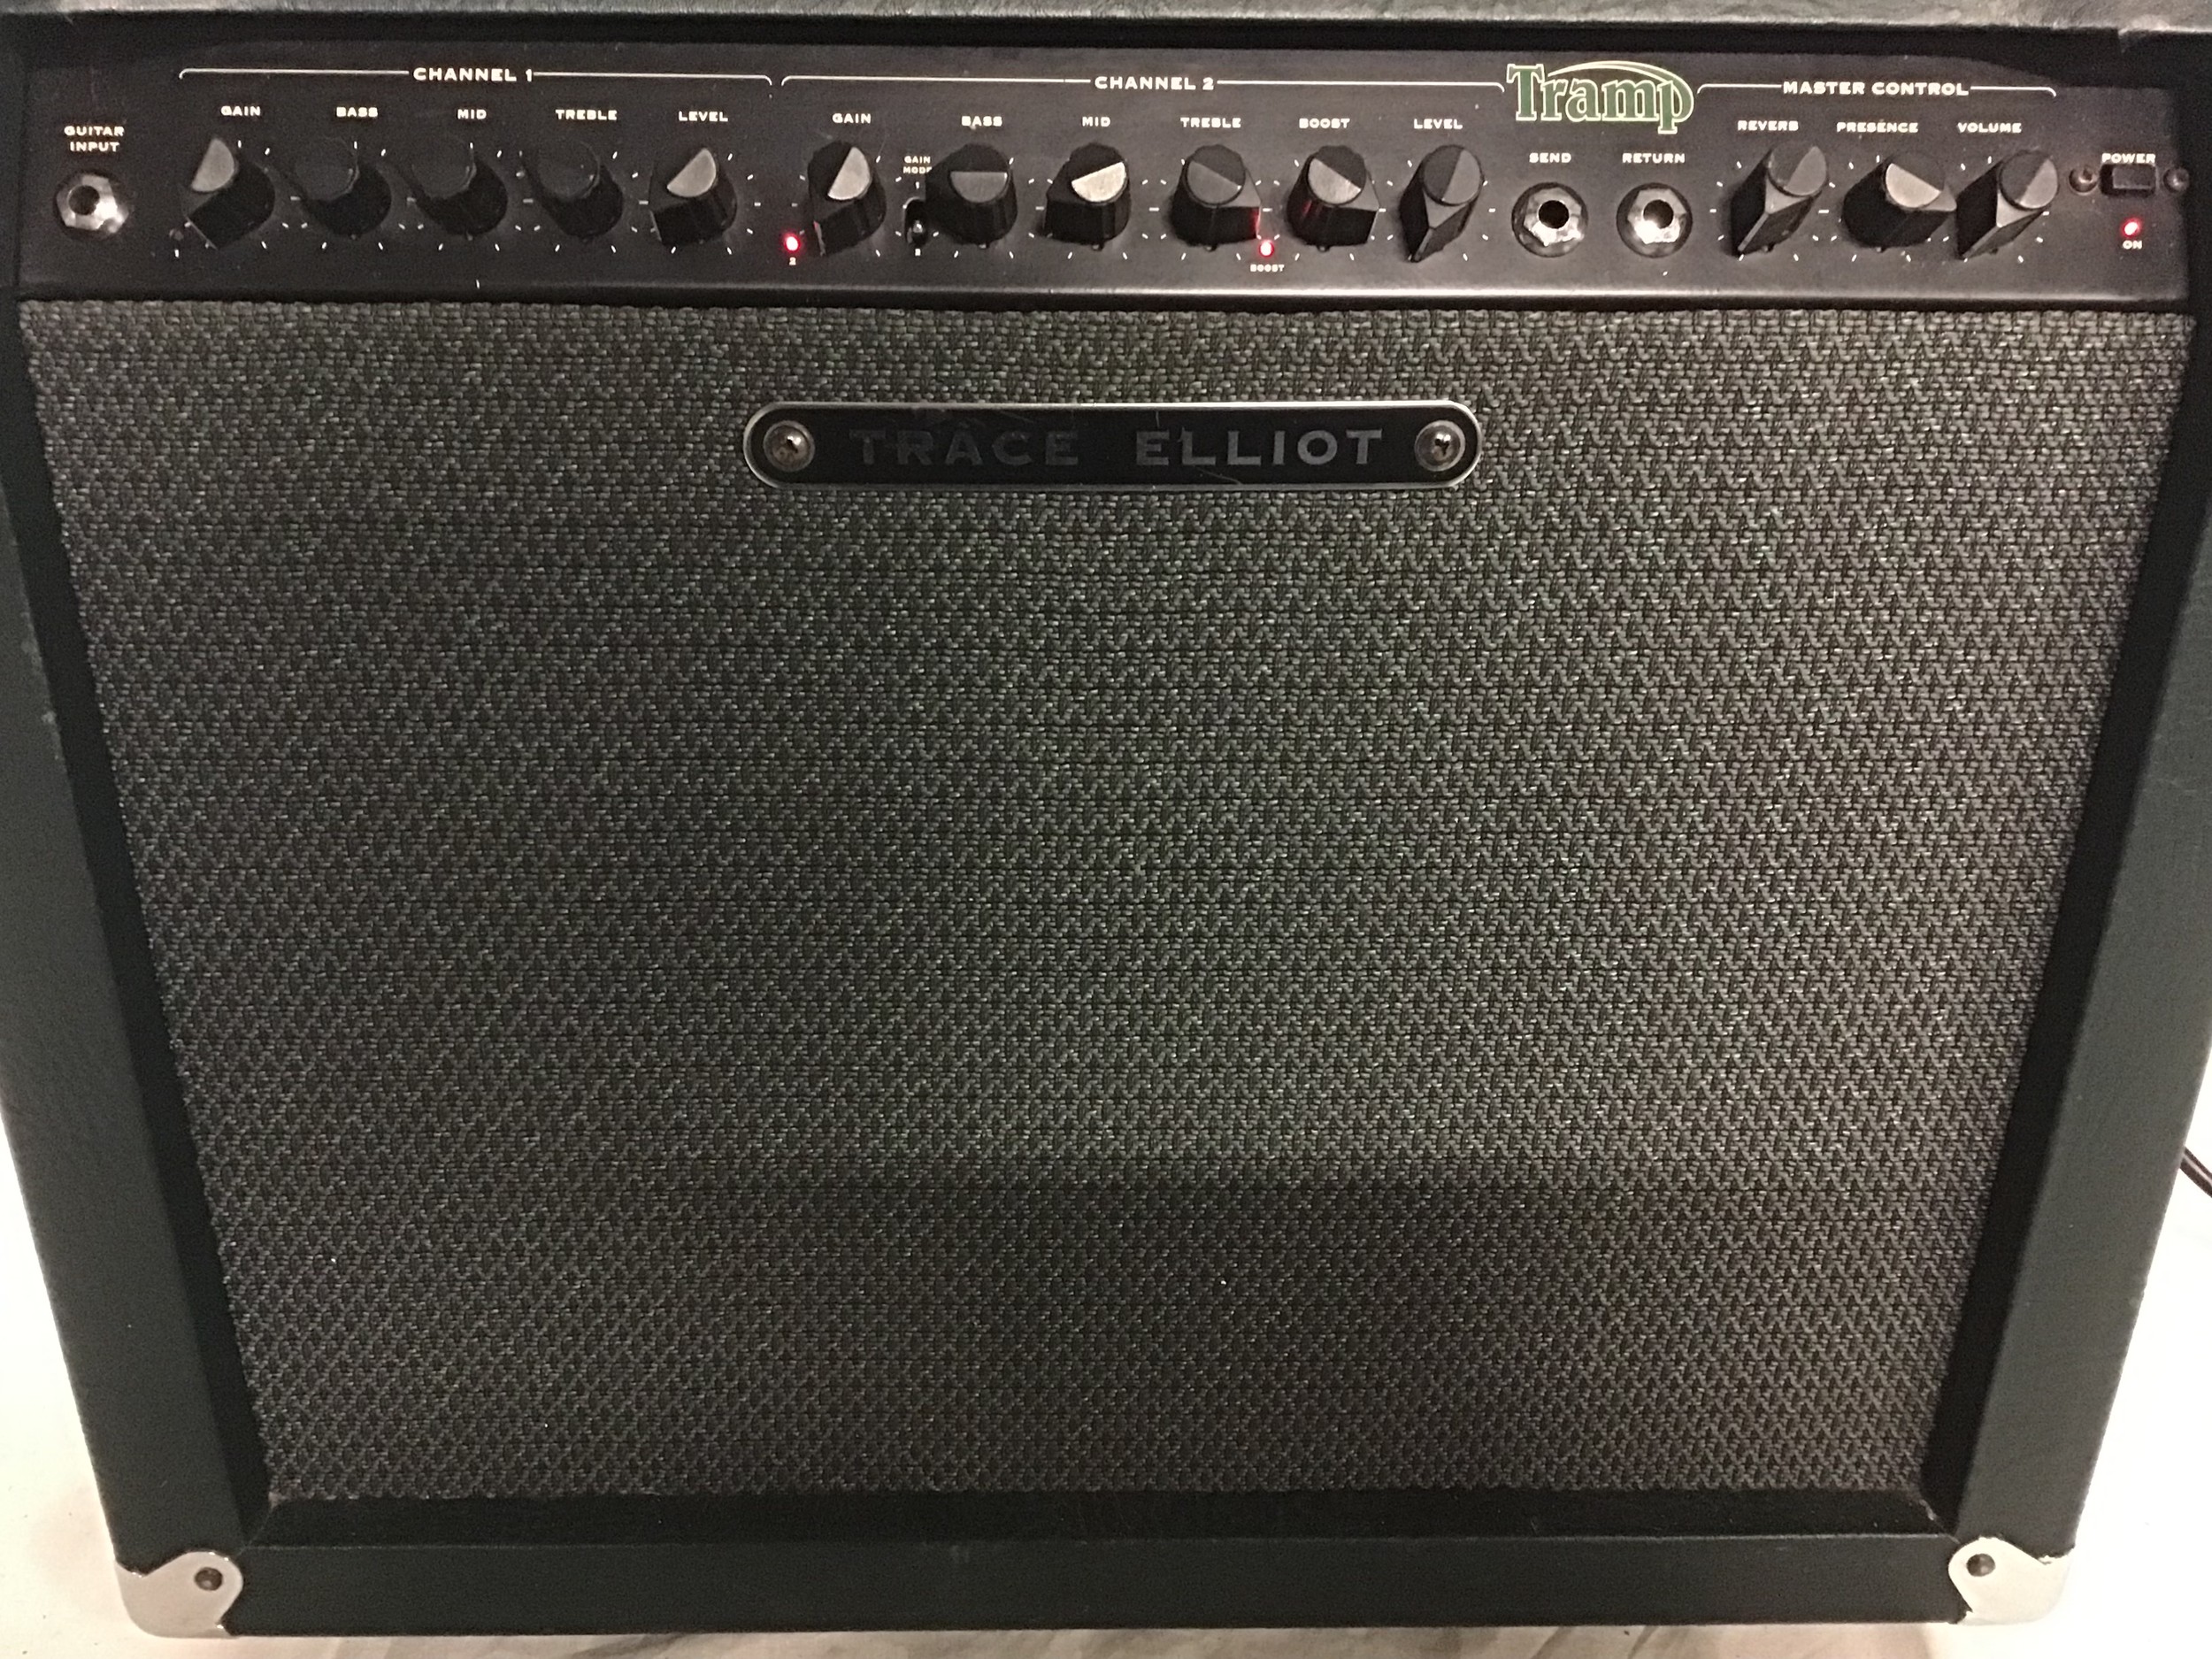 TRACE ELLIOT GUITAR AMPLIFIER. This is named ‘Tramp’ and powers up when plugged in. Comes with - Image 2 of 3